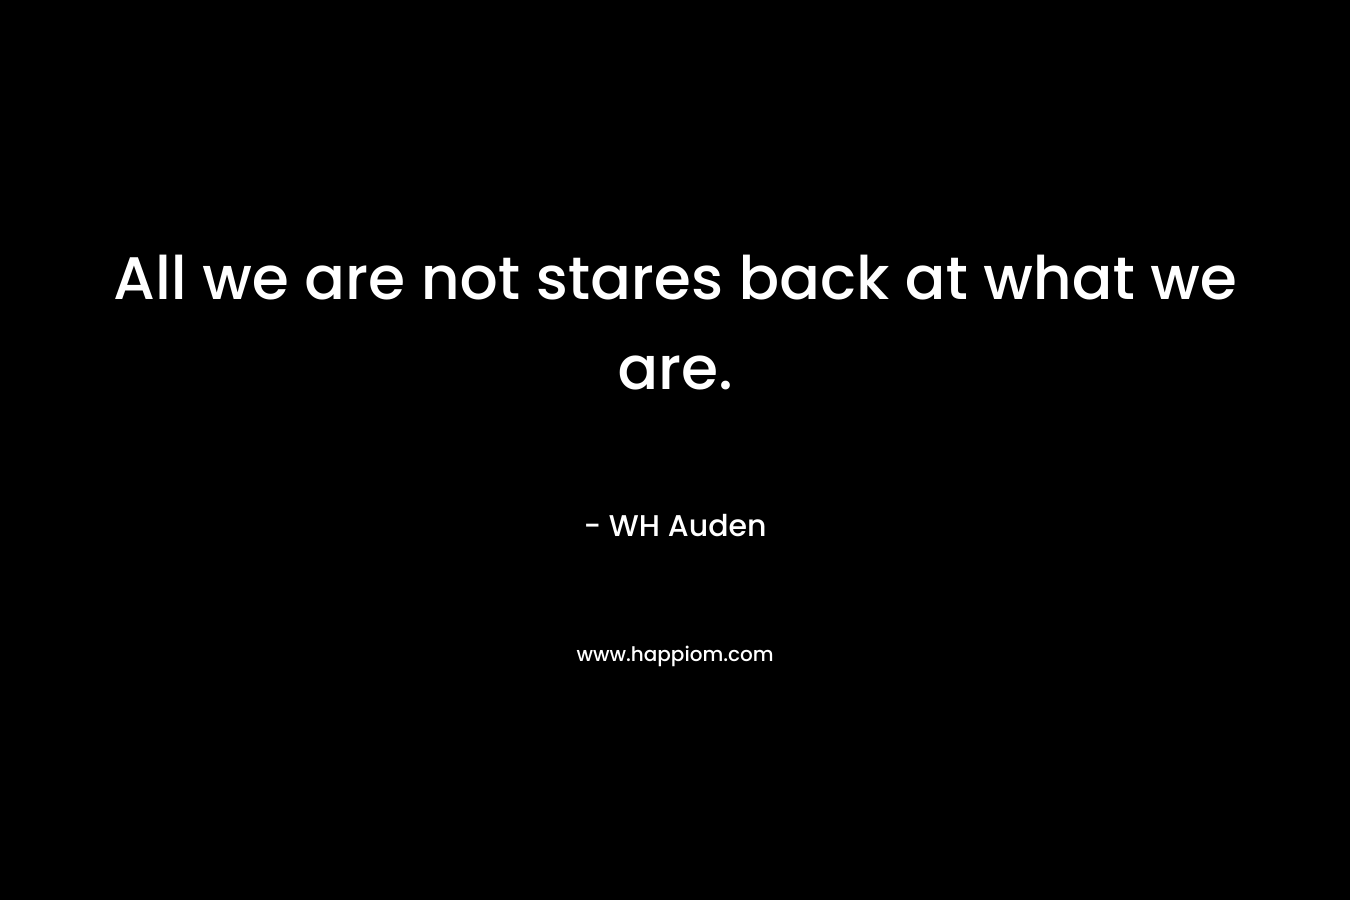 All we are not stares back at what we are.